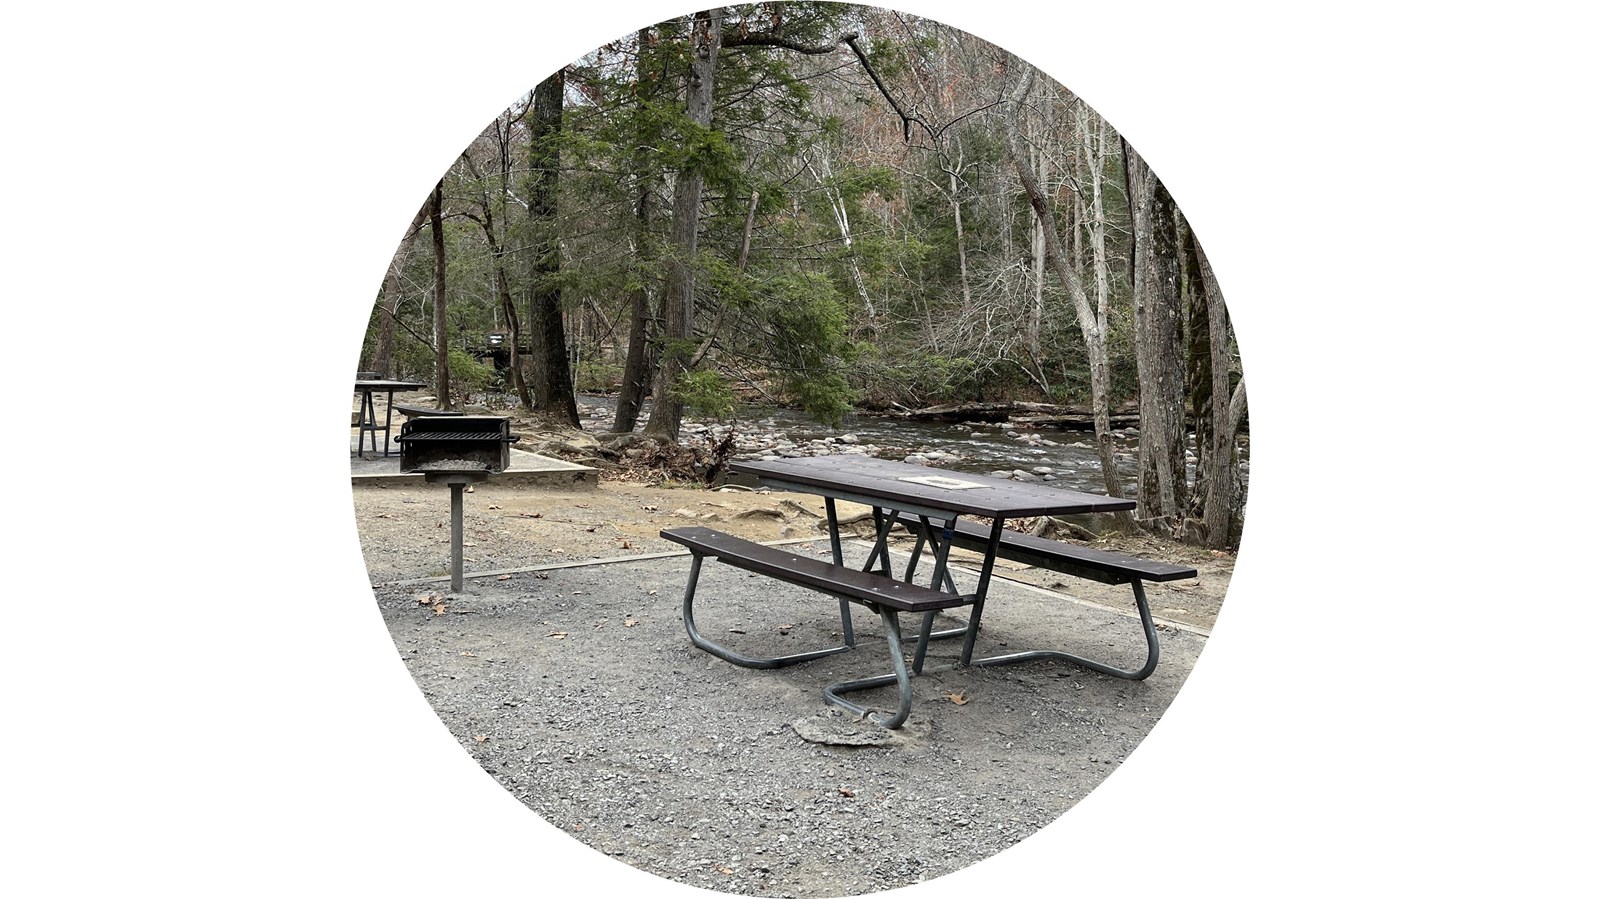 A brown picnic table with metal legs beside a metal grill on a gravel pad along a creek in winter.